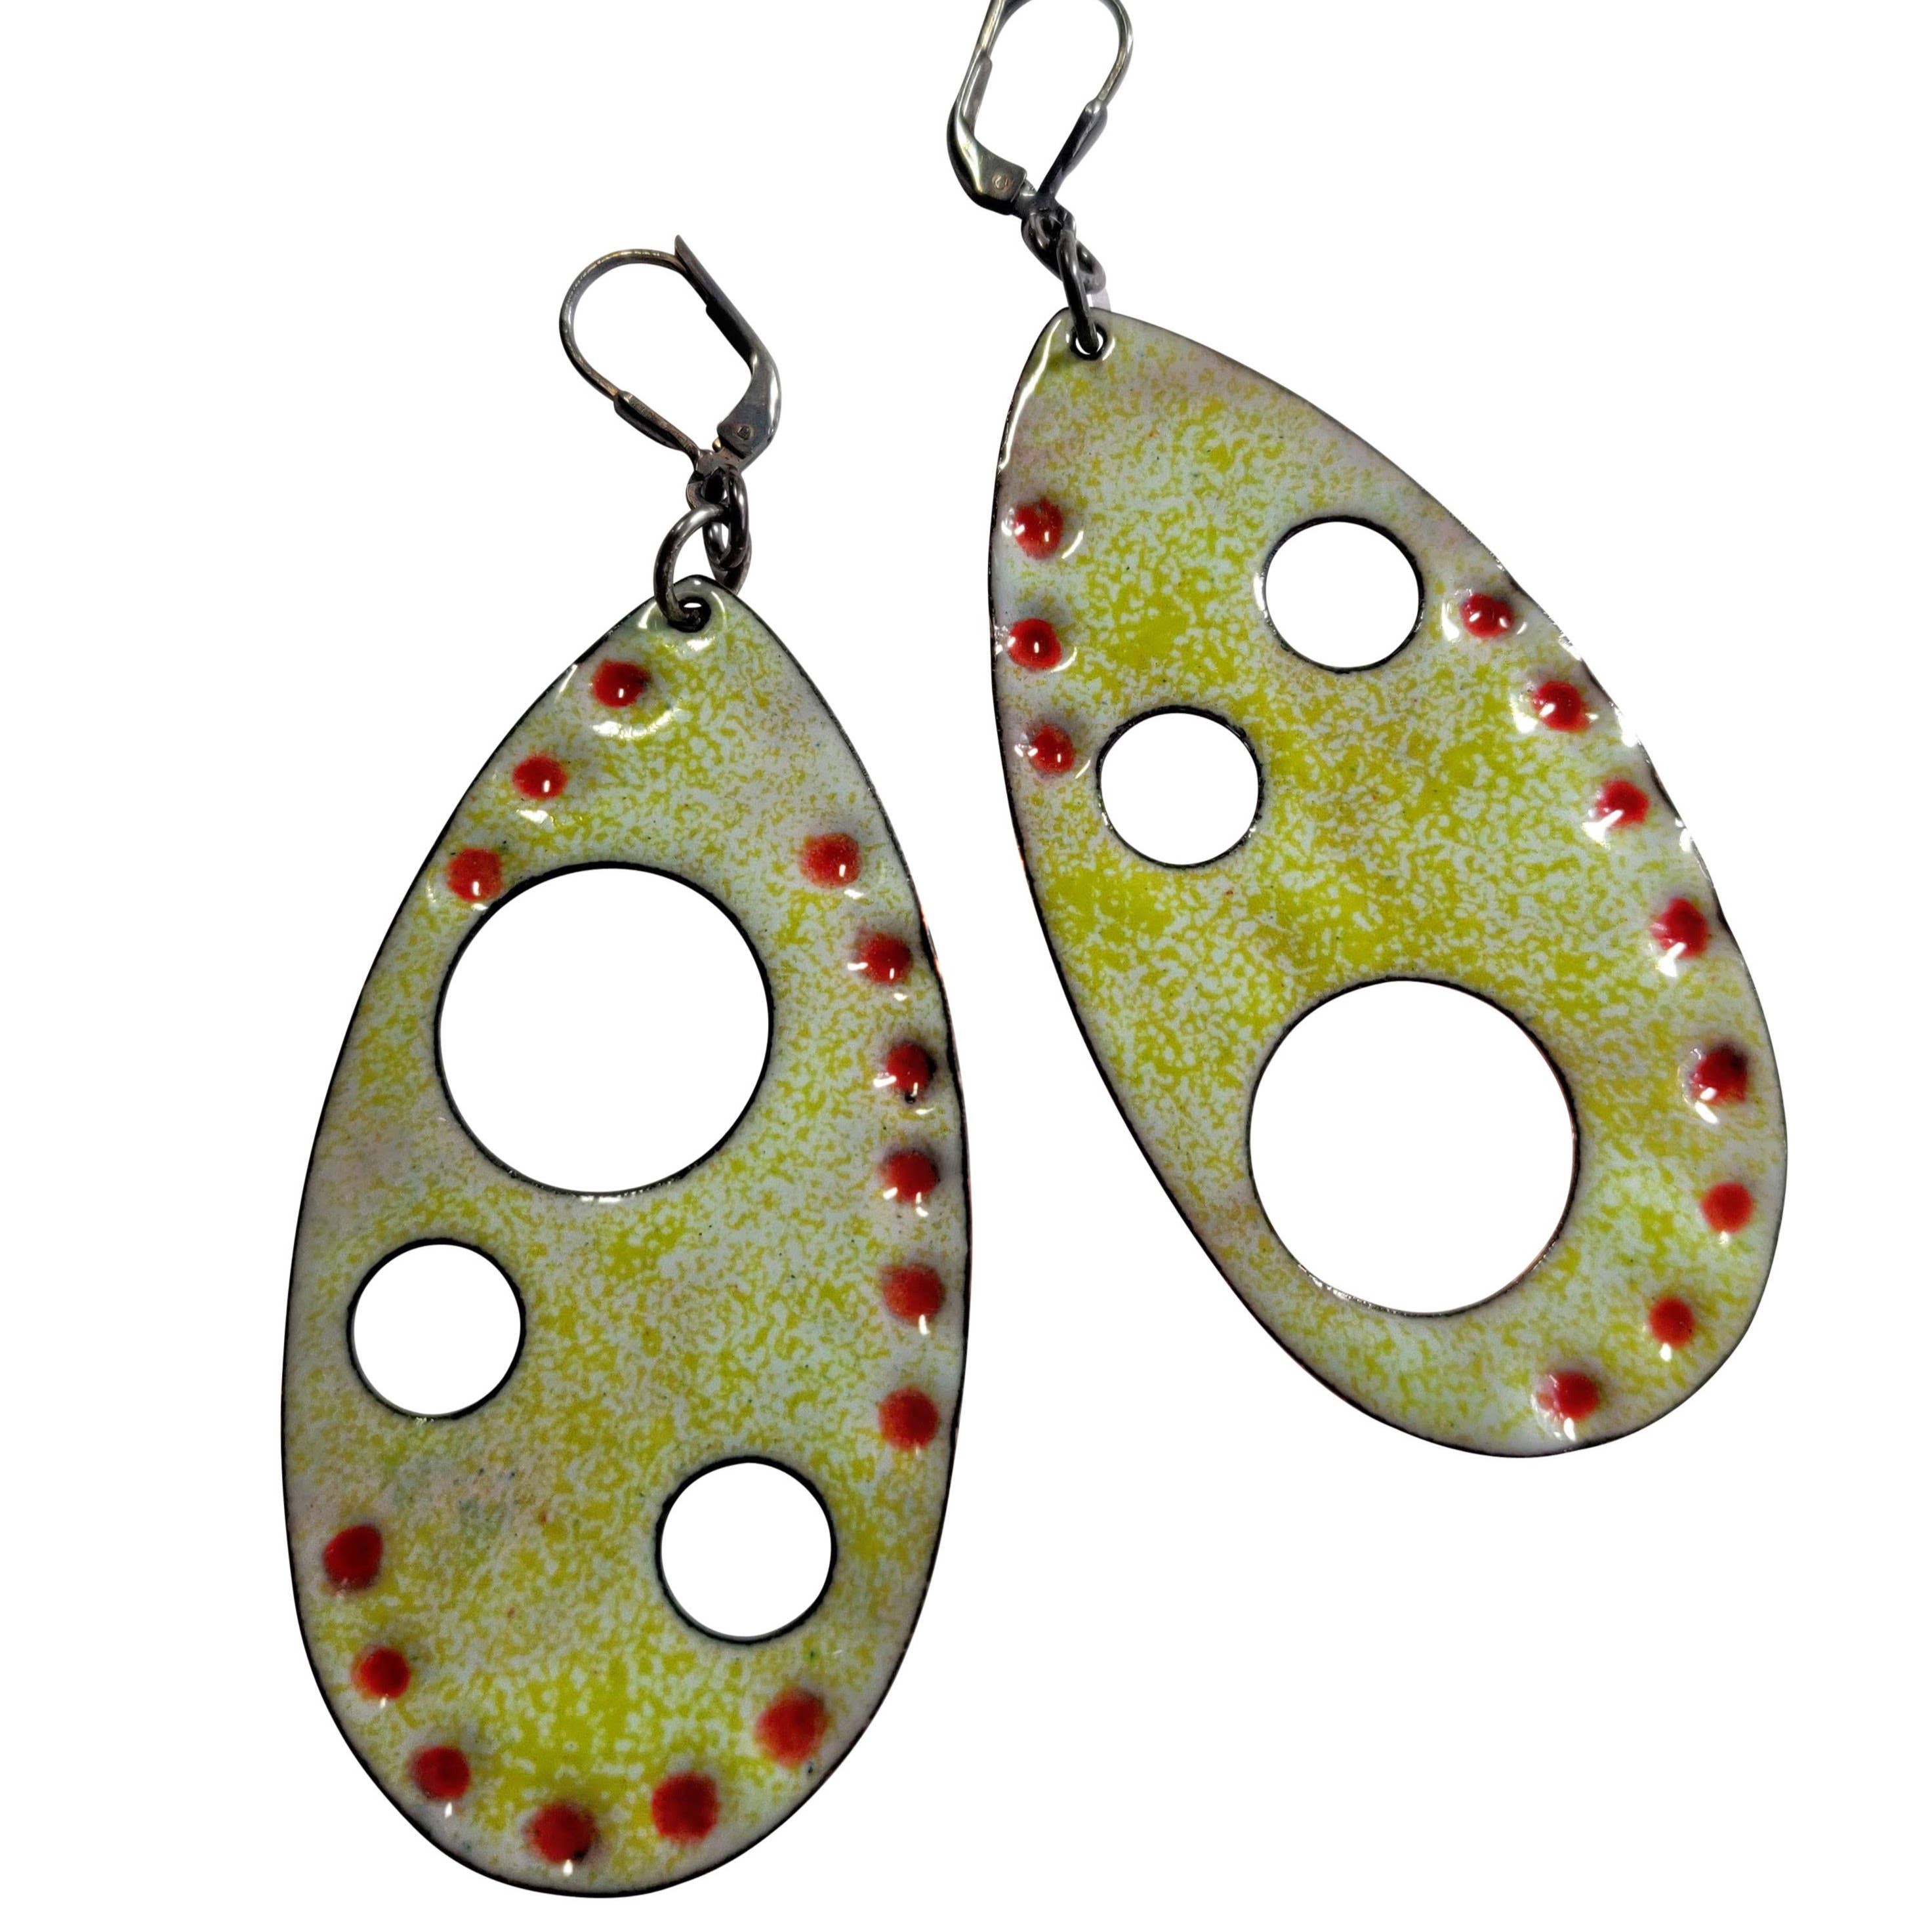 golden and green Pretty Creole stainless steel earrings with a reversible leather colour on the very trendy reversible leather